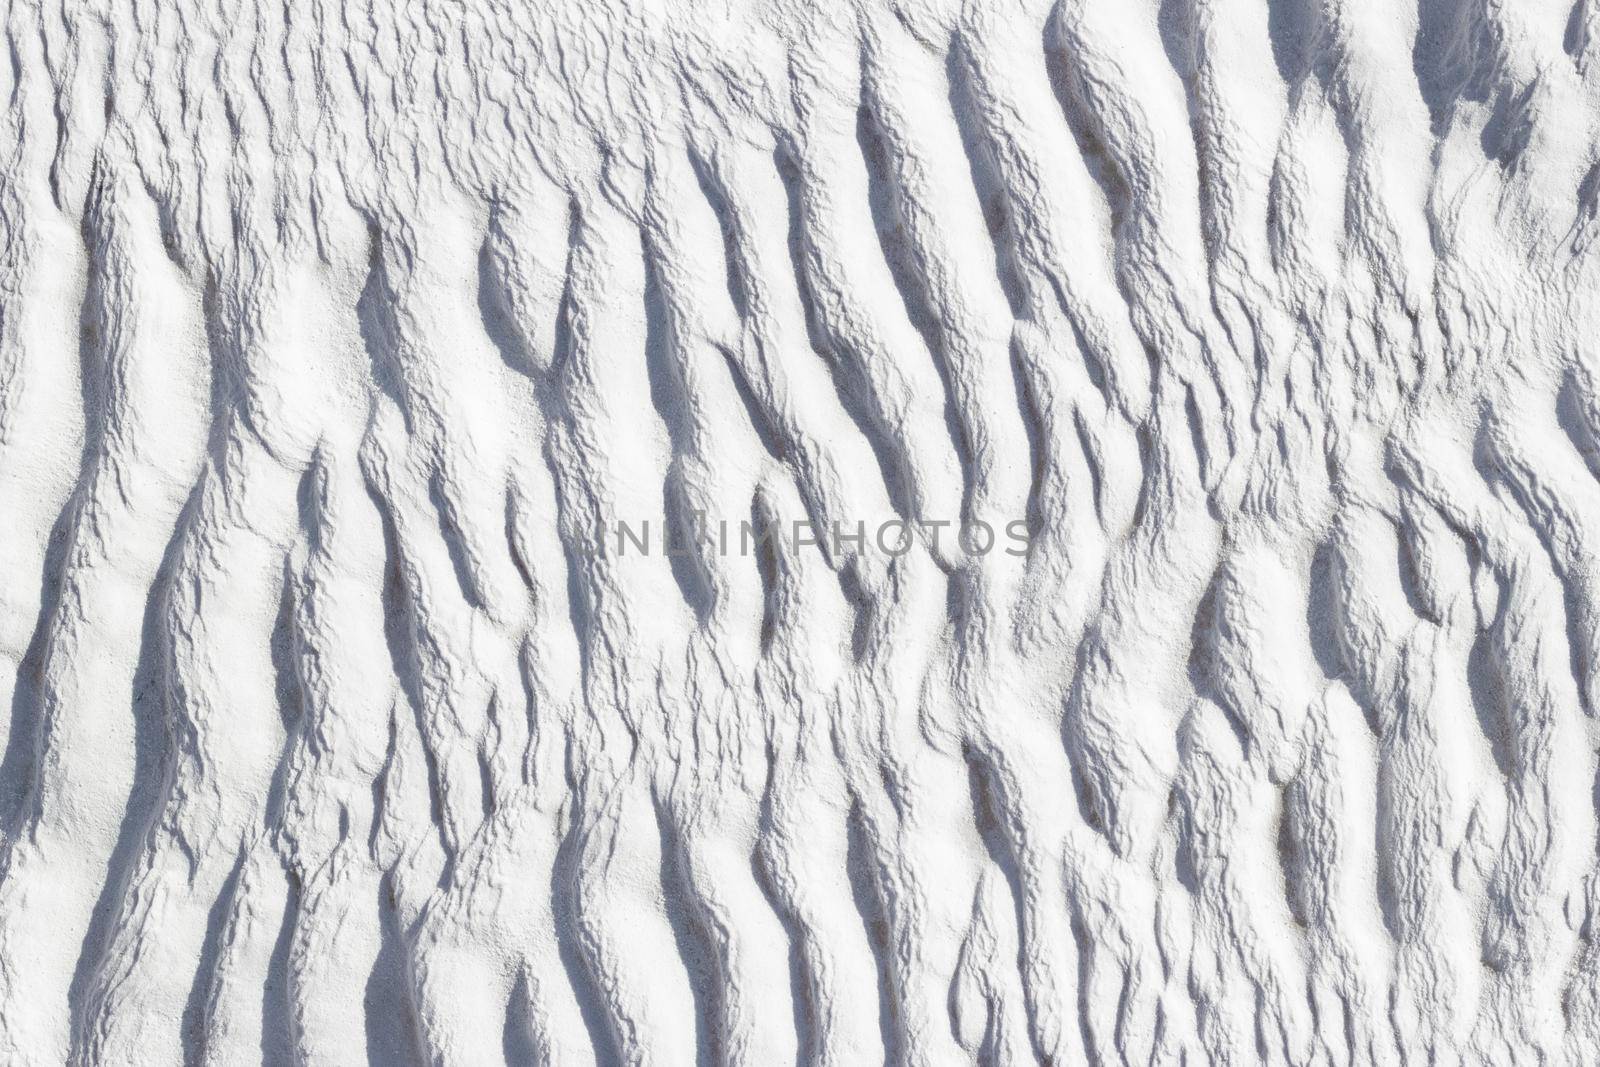 Ribbed abstract texture of Pamukkale calcium travertine in Turkey, asymmetric pattern close-up.